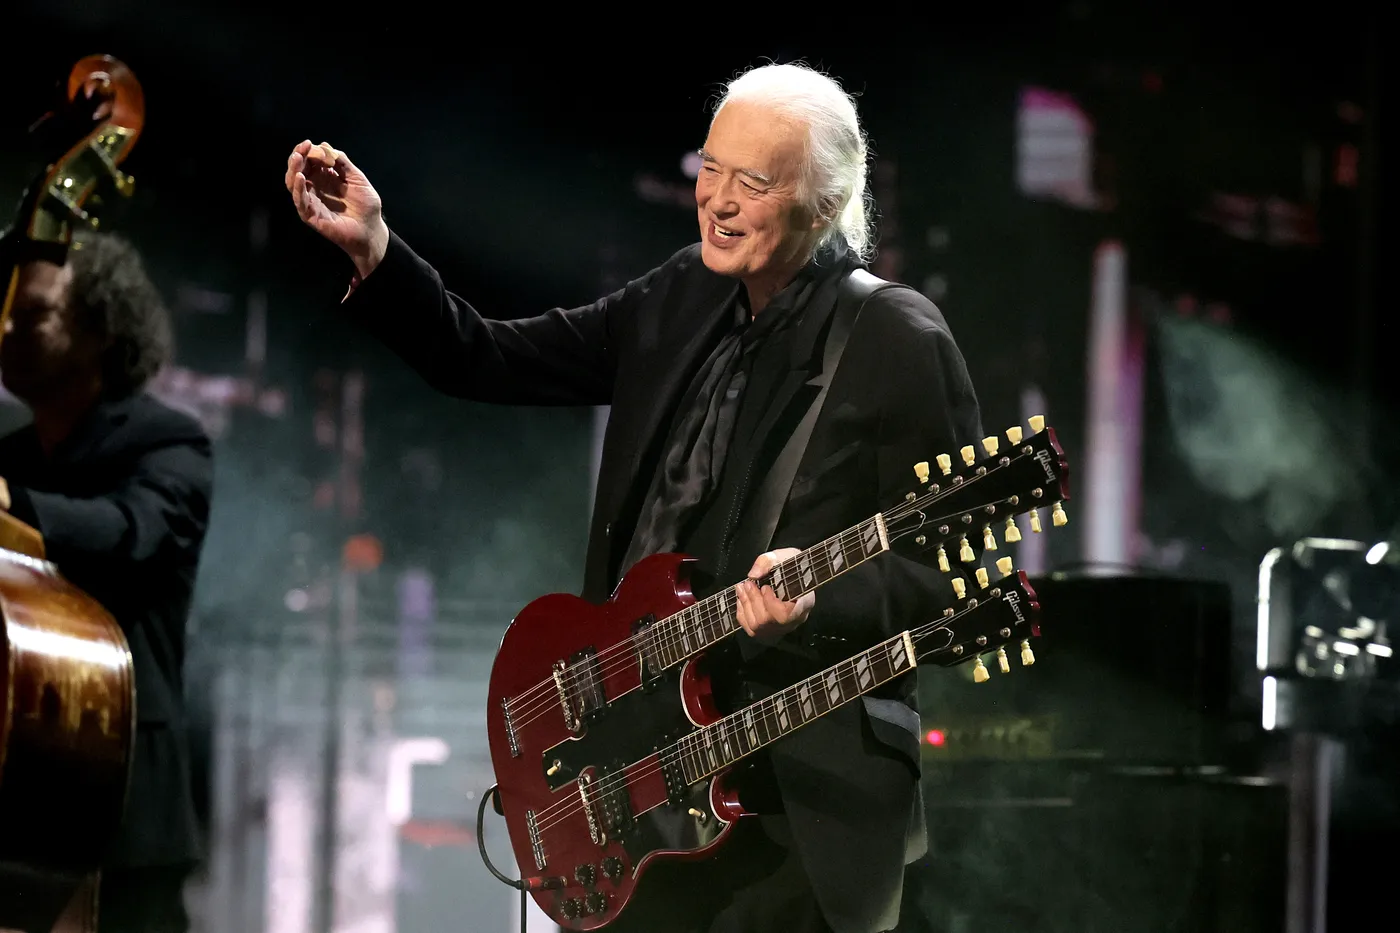 Jimmy Page Delivers Rare Live Performance at Rock Hall Induction